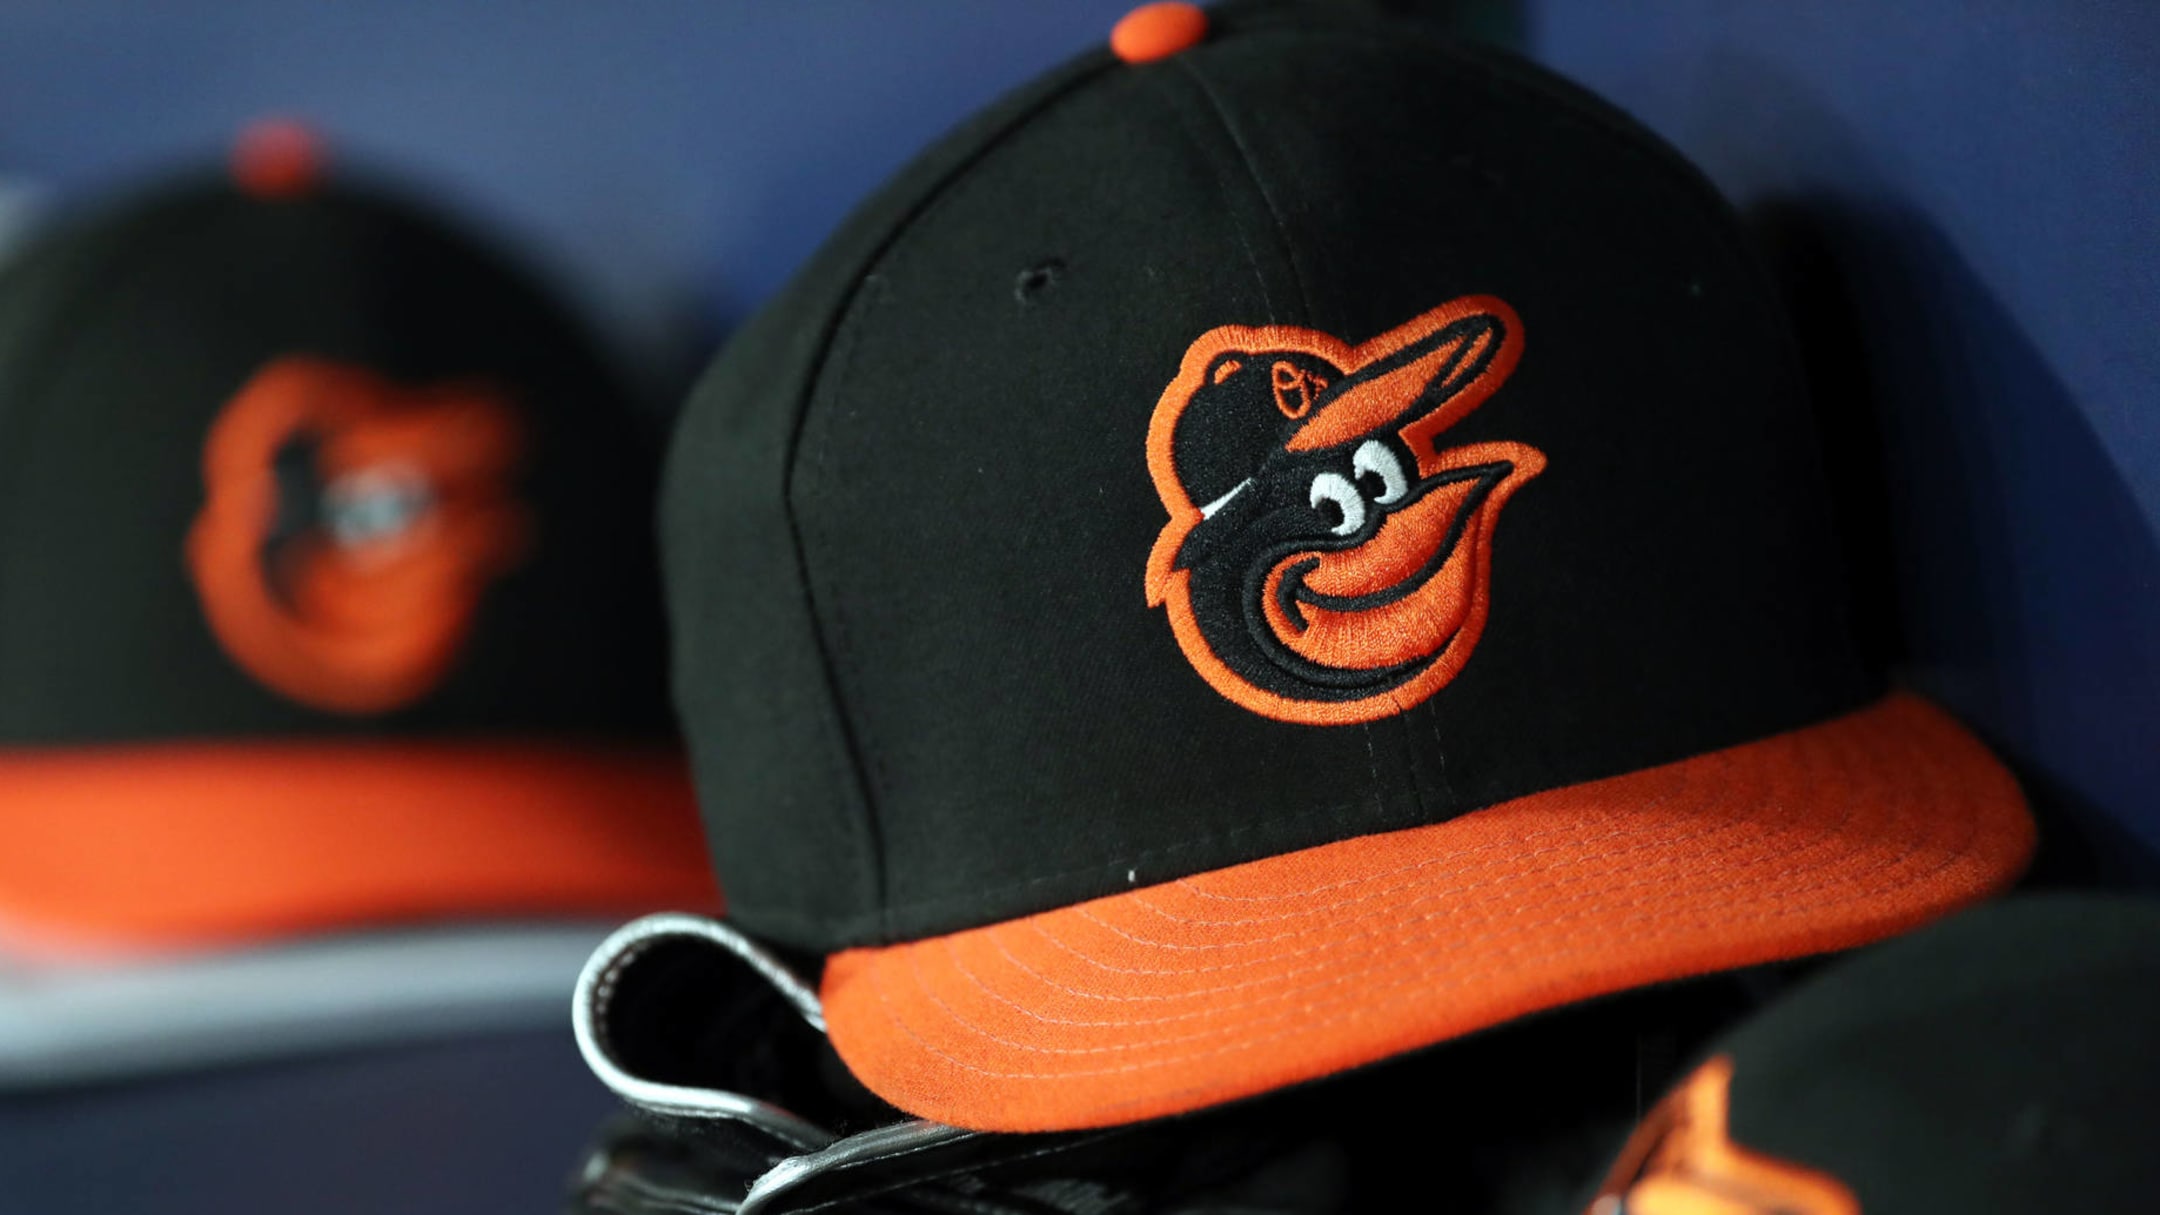 Who Will Orioles Take With No. 1 Pick In 2022 MLB Draft? - PressBox